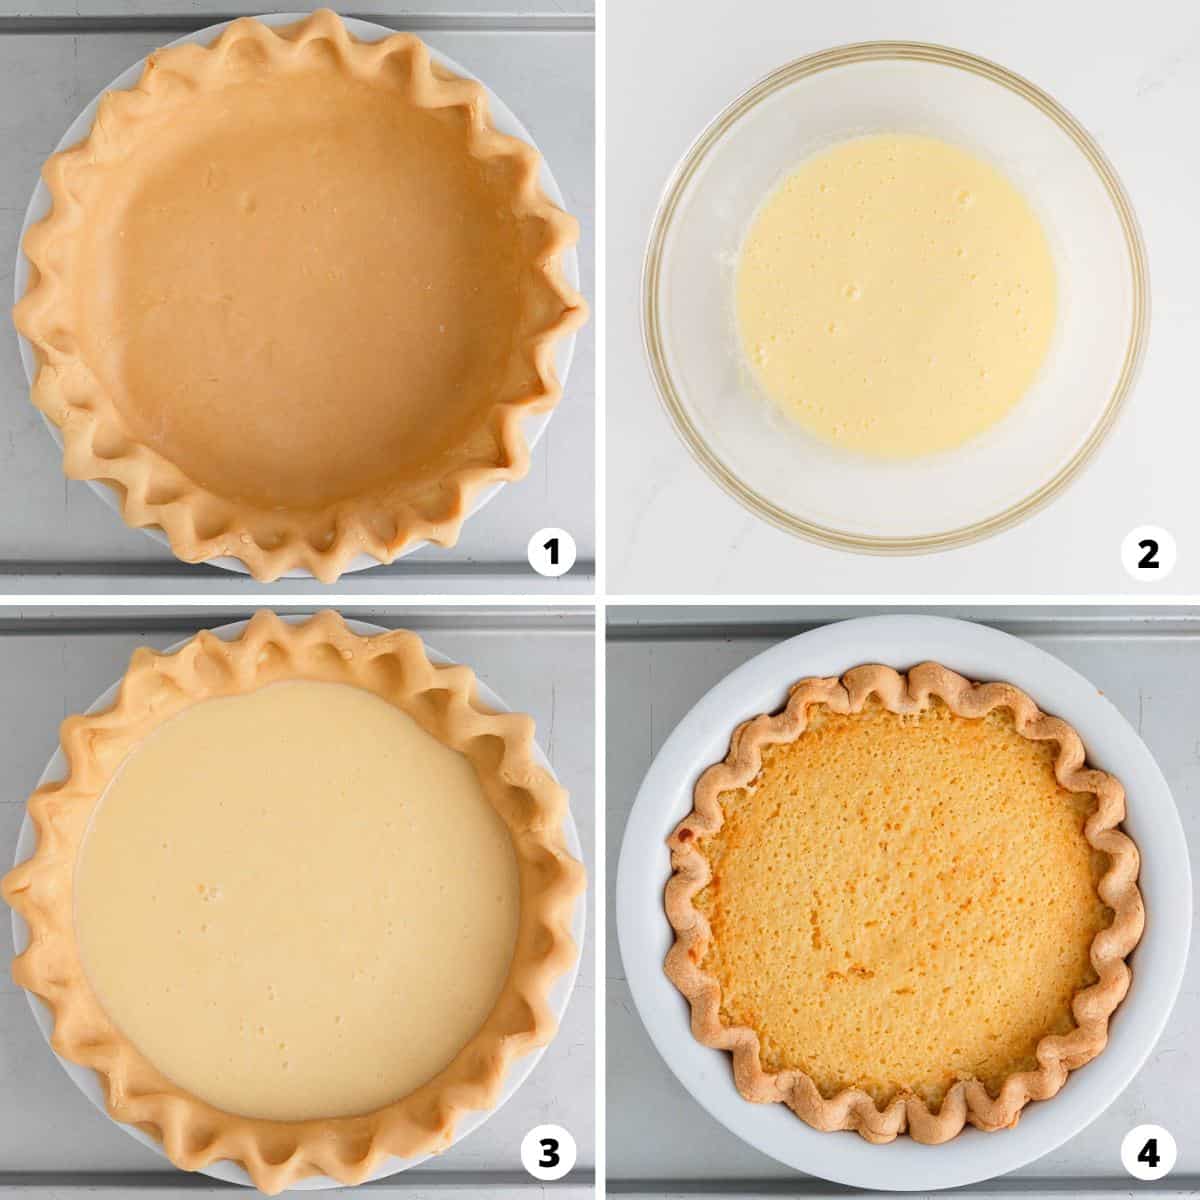 Showing how to make buttermilk pie in a 4 step collage.